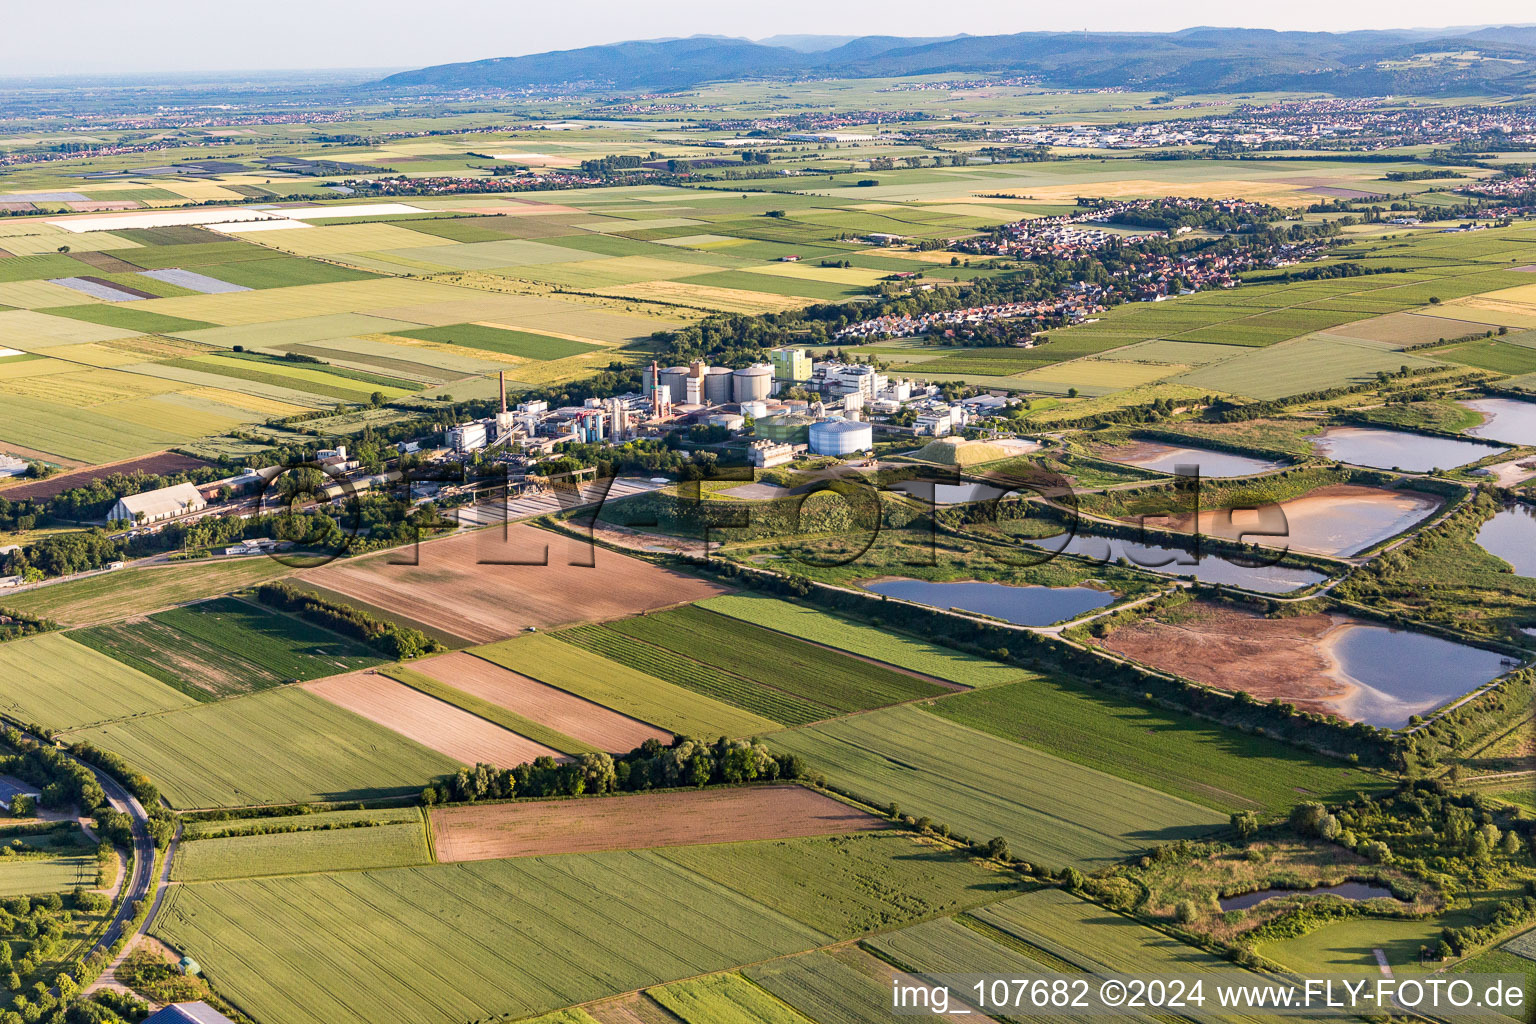 Aerial view of Sewage works Basin for waste water treatment of sugar factory Suedzucker AG in Obrigheim (Pfalz) in the state Rhineland-Palatinate, Germany